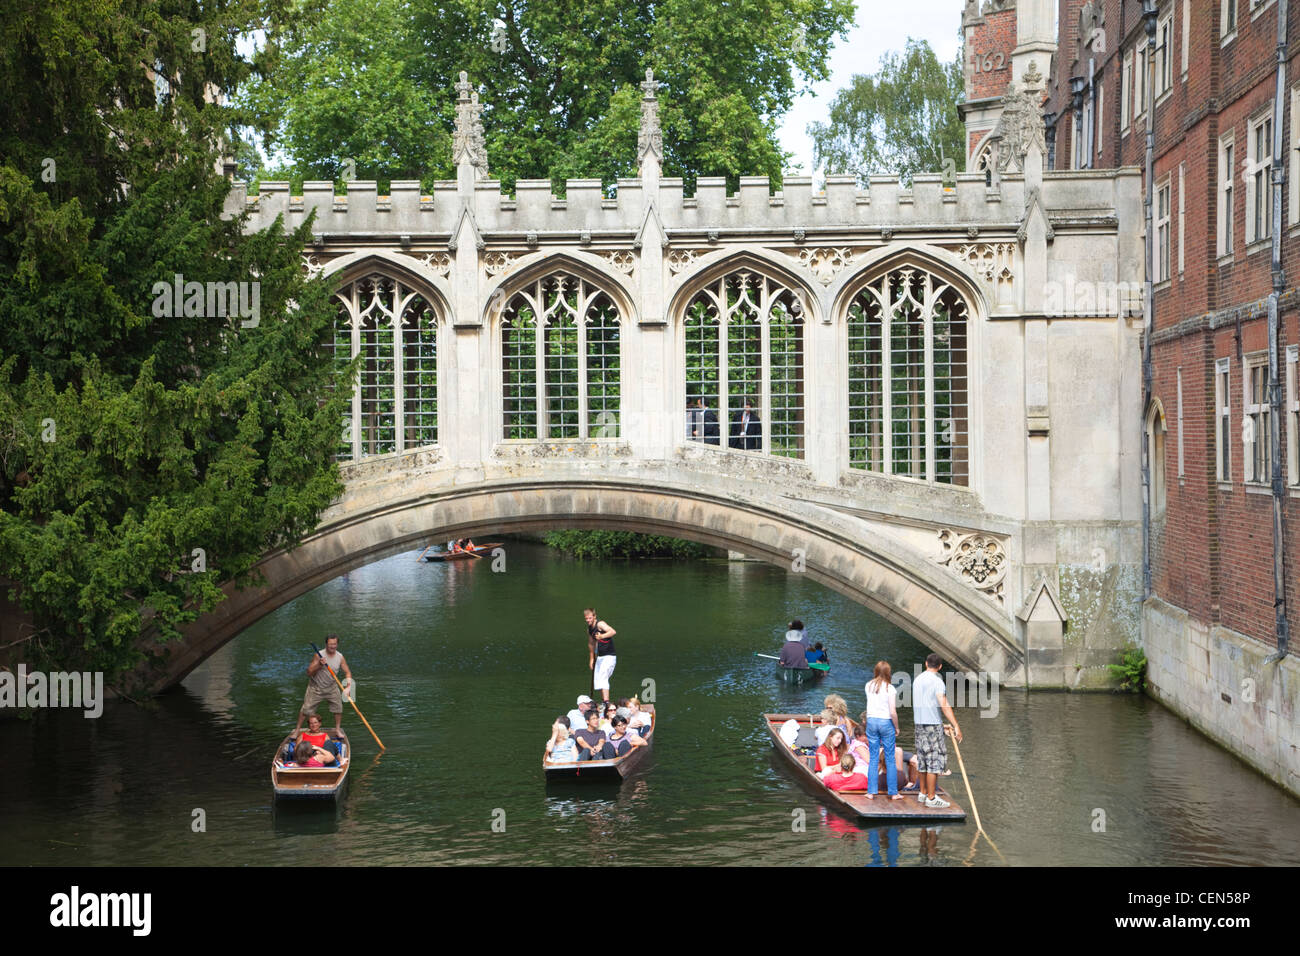 England, Cambridgeshire, Cambridge, Punting on River Cam with Bridge of Sighs and Saint John's College Stock Photo